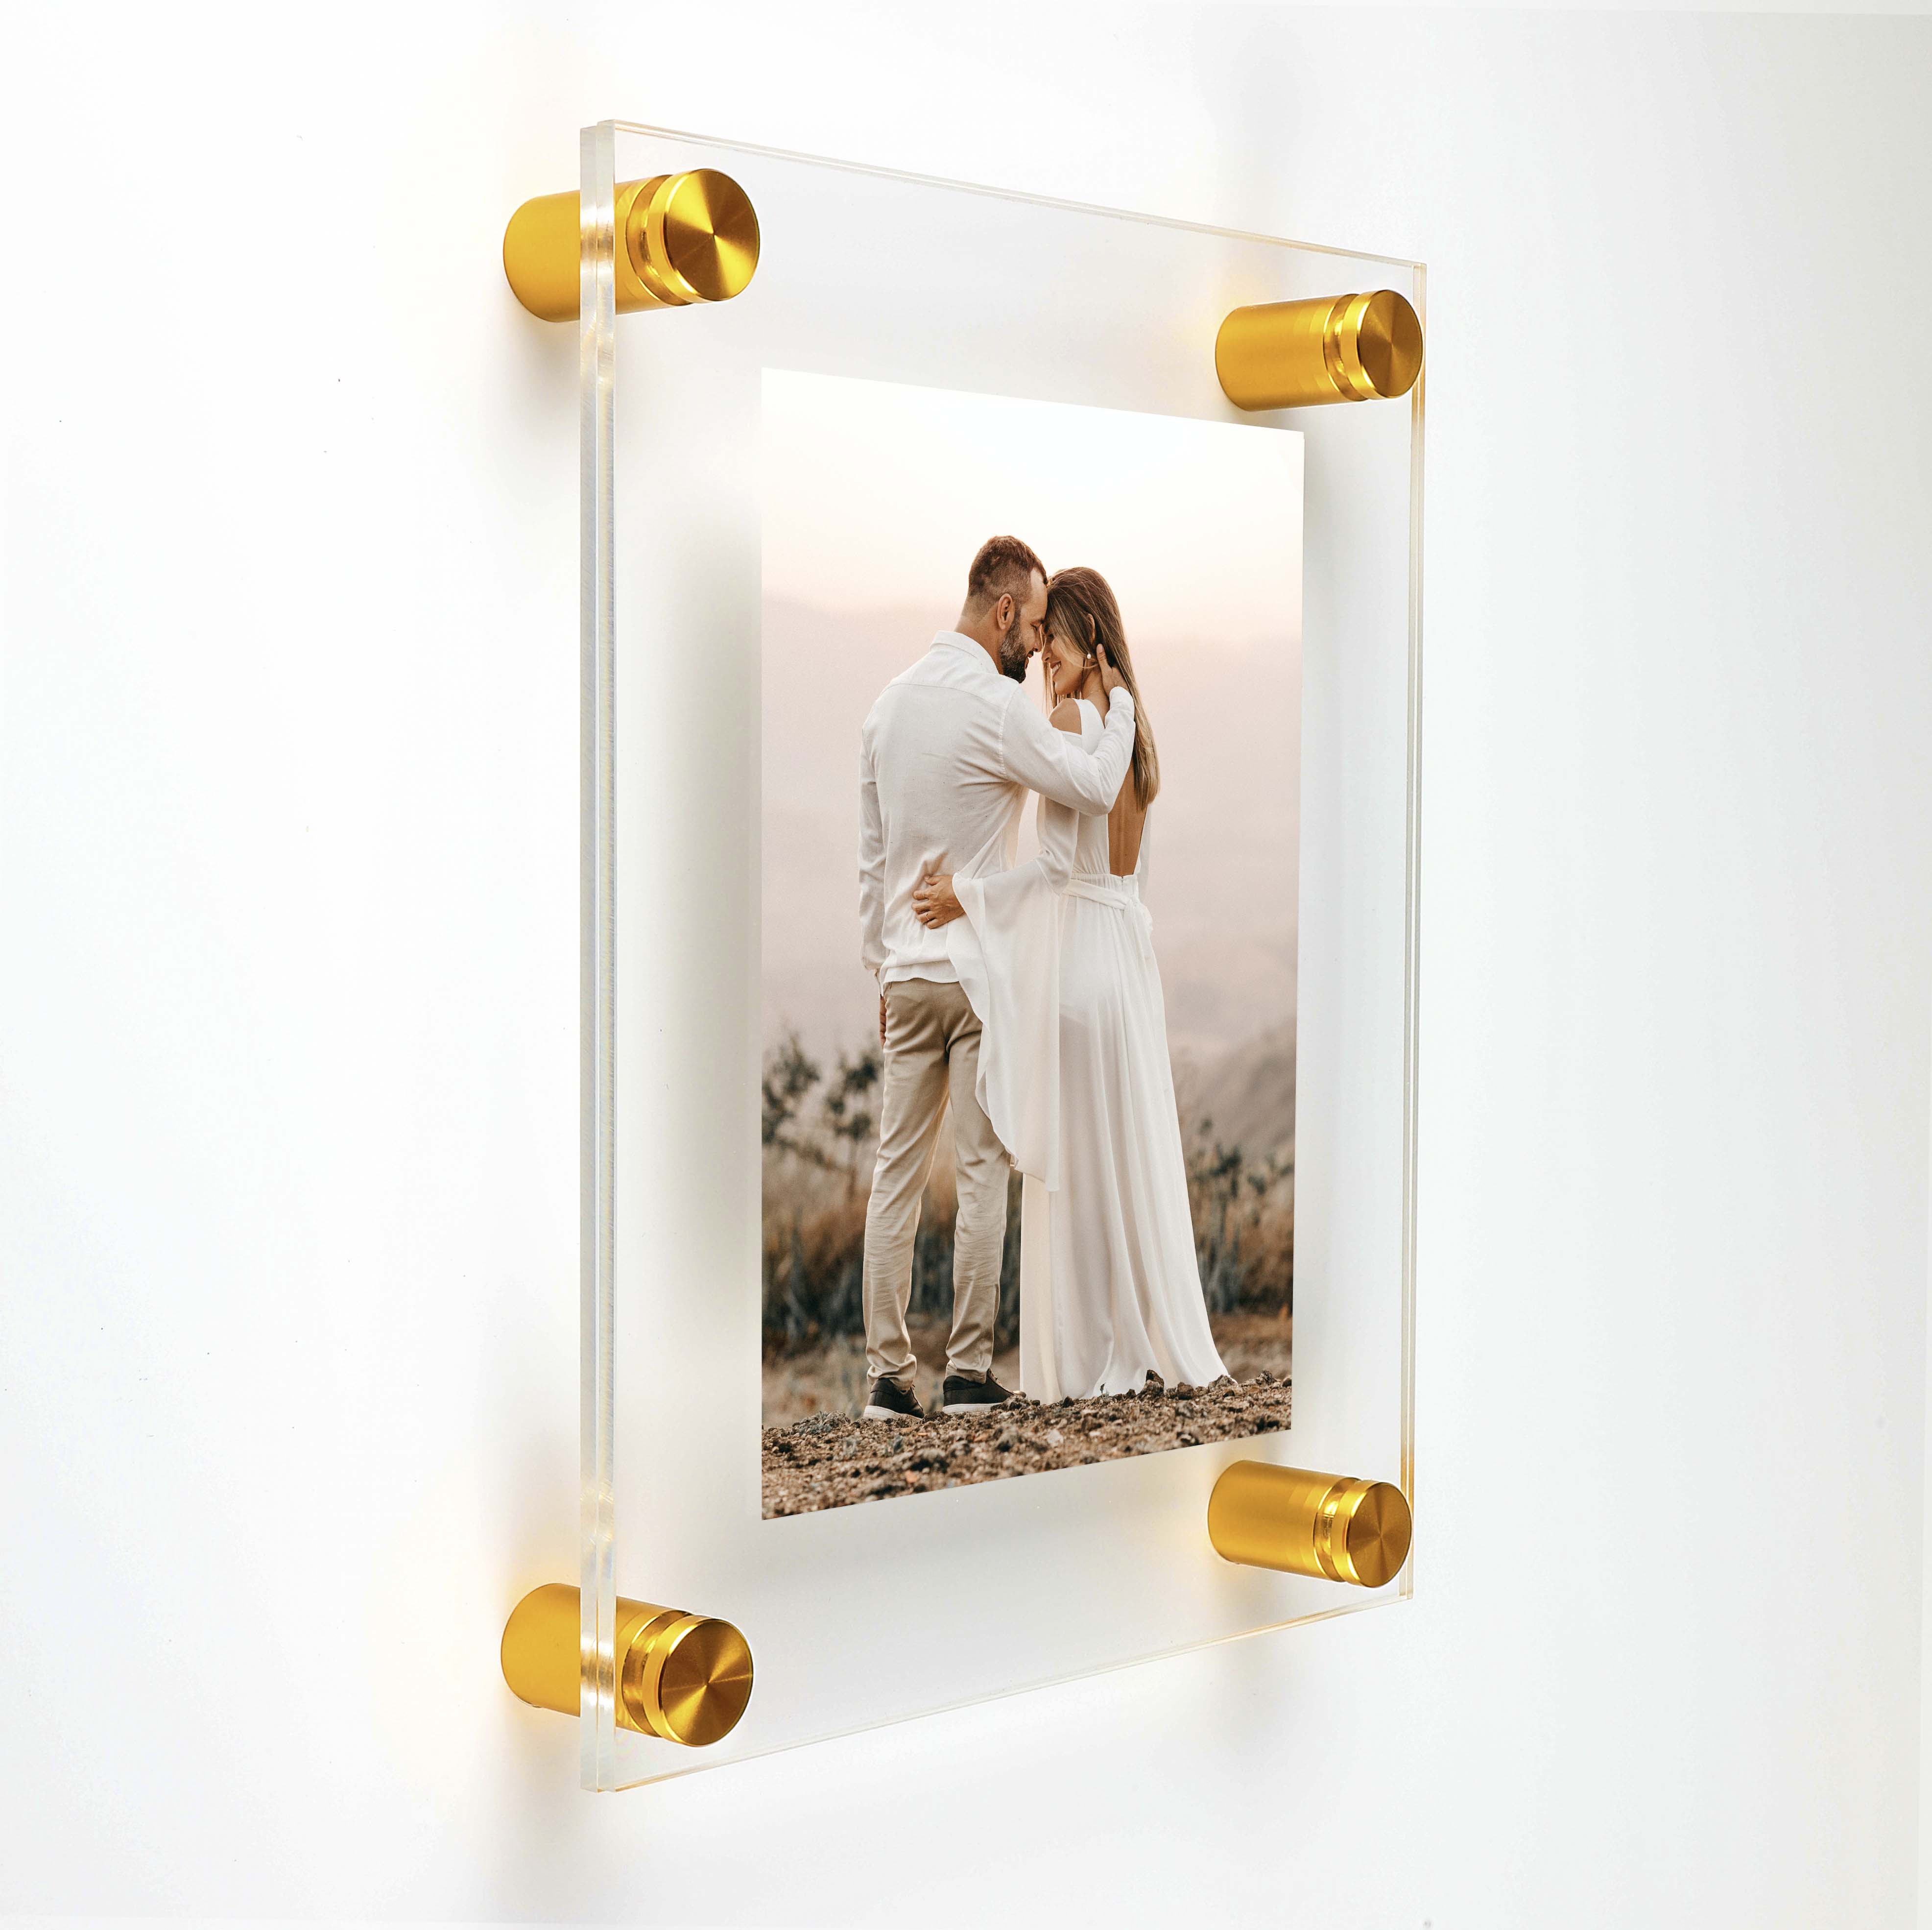 (2) 19-3/4'' x 26'' Clear Acrylics , Pre-Drilled With Polished Edges (Thick 3/16'' each), Wall Frame with (4) 3/4'' x 3/4'' Gold Anodized Aluminum Standoffs includes Screws and Anchors